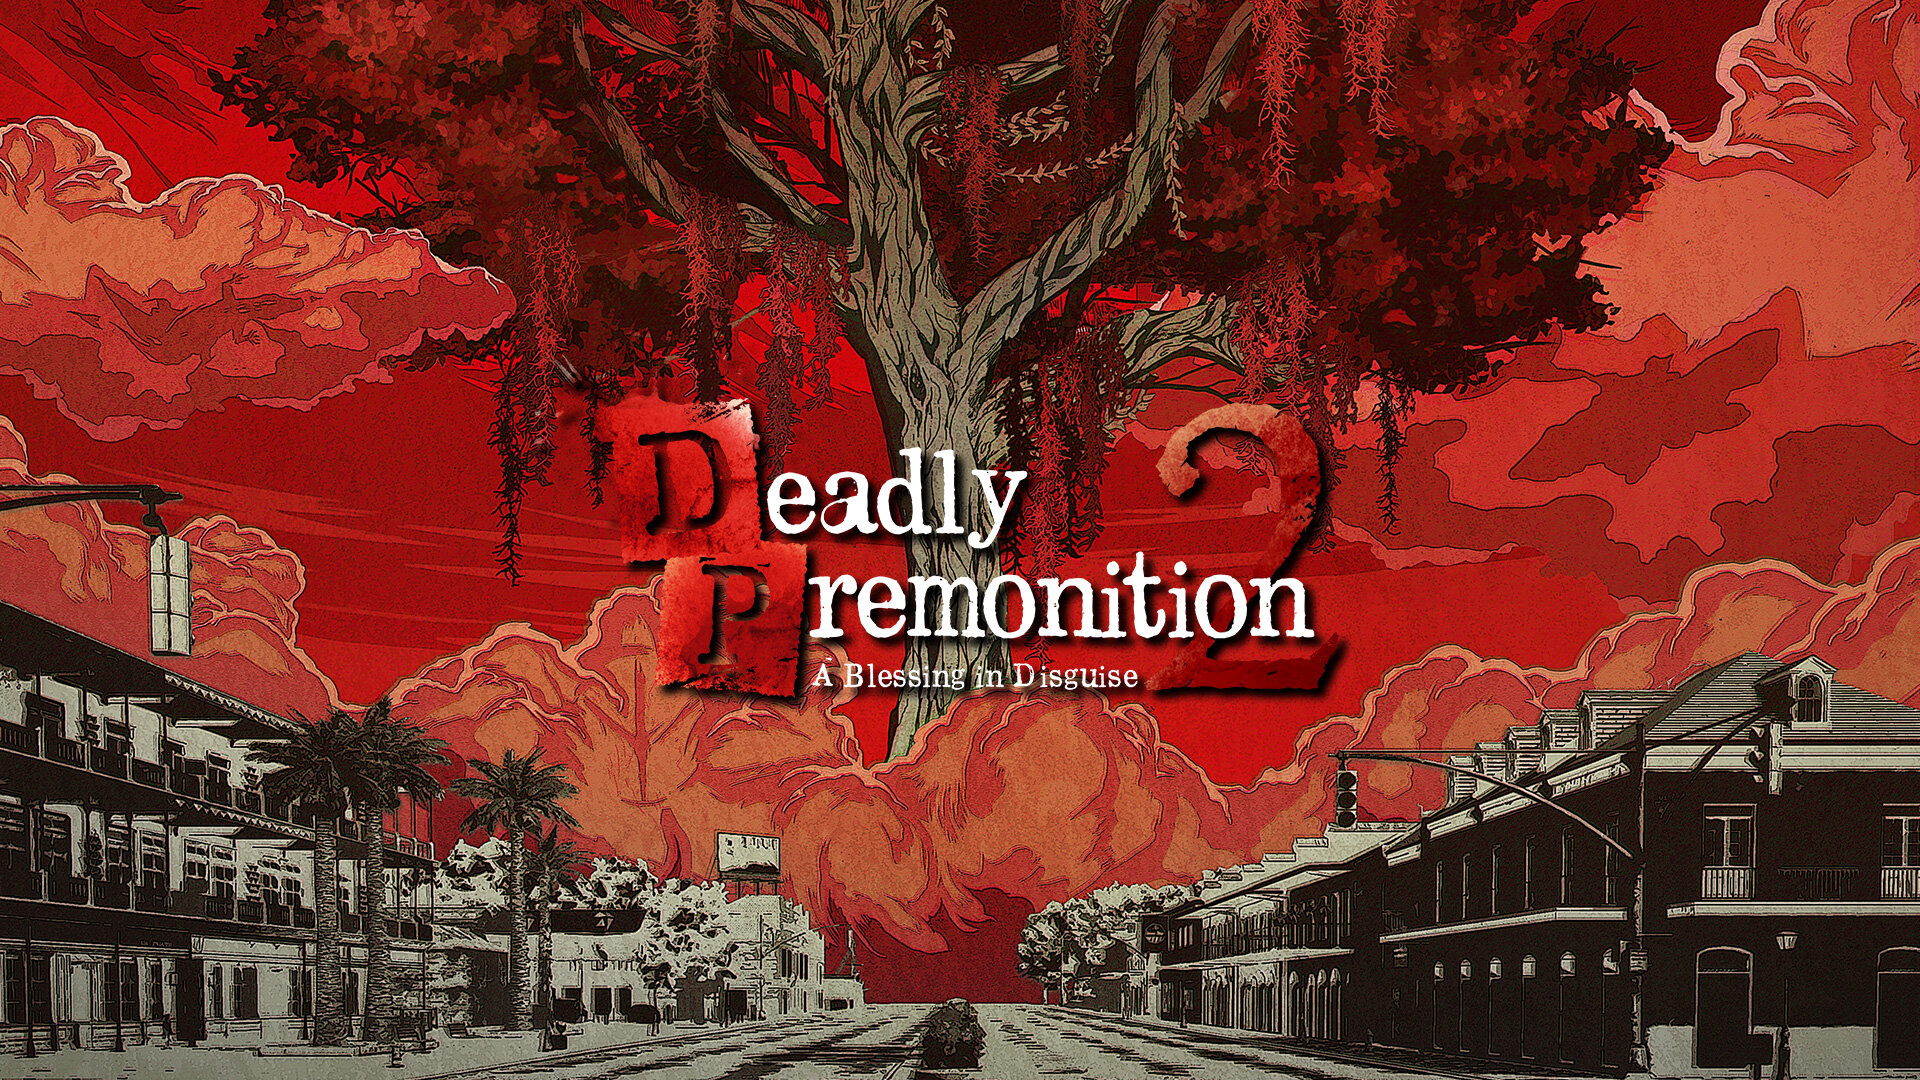 Deadly Premonition, “Deadly Premonition 2: A Blessing in Disguise” (Nintendo Switch) | Análise Gaming